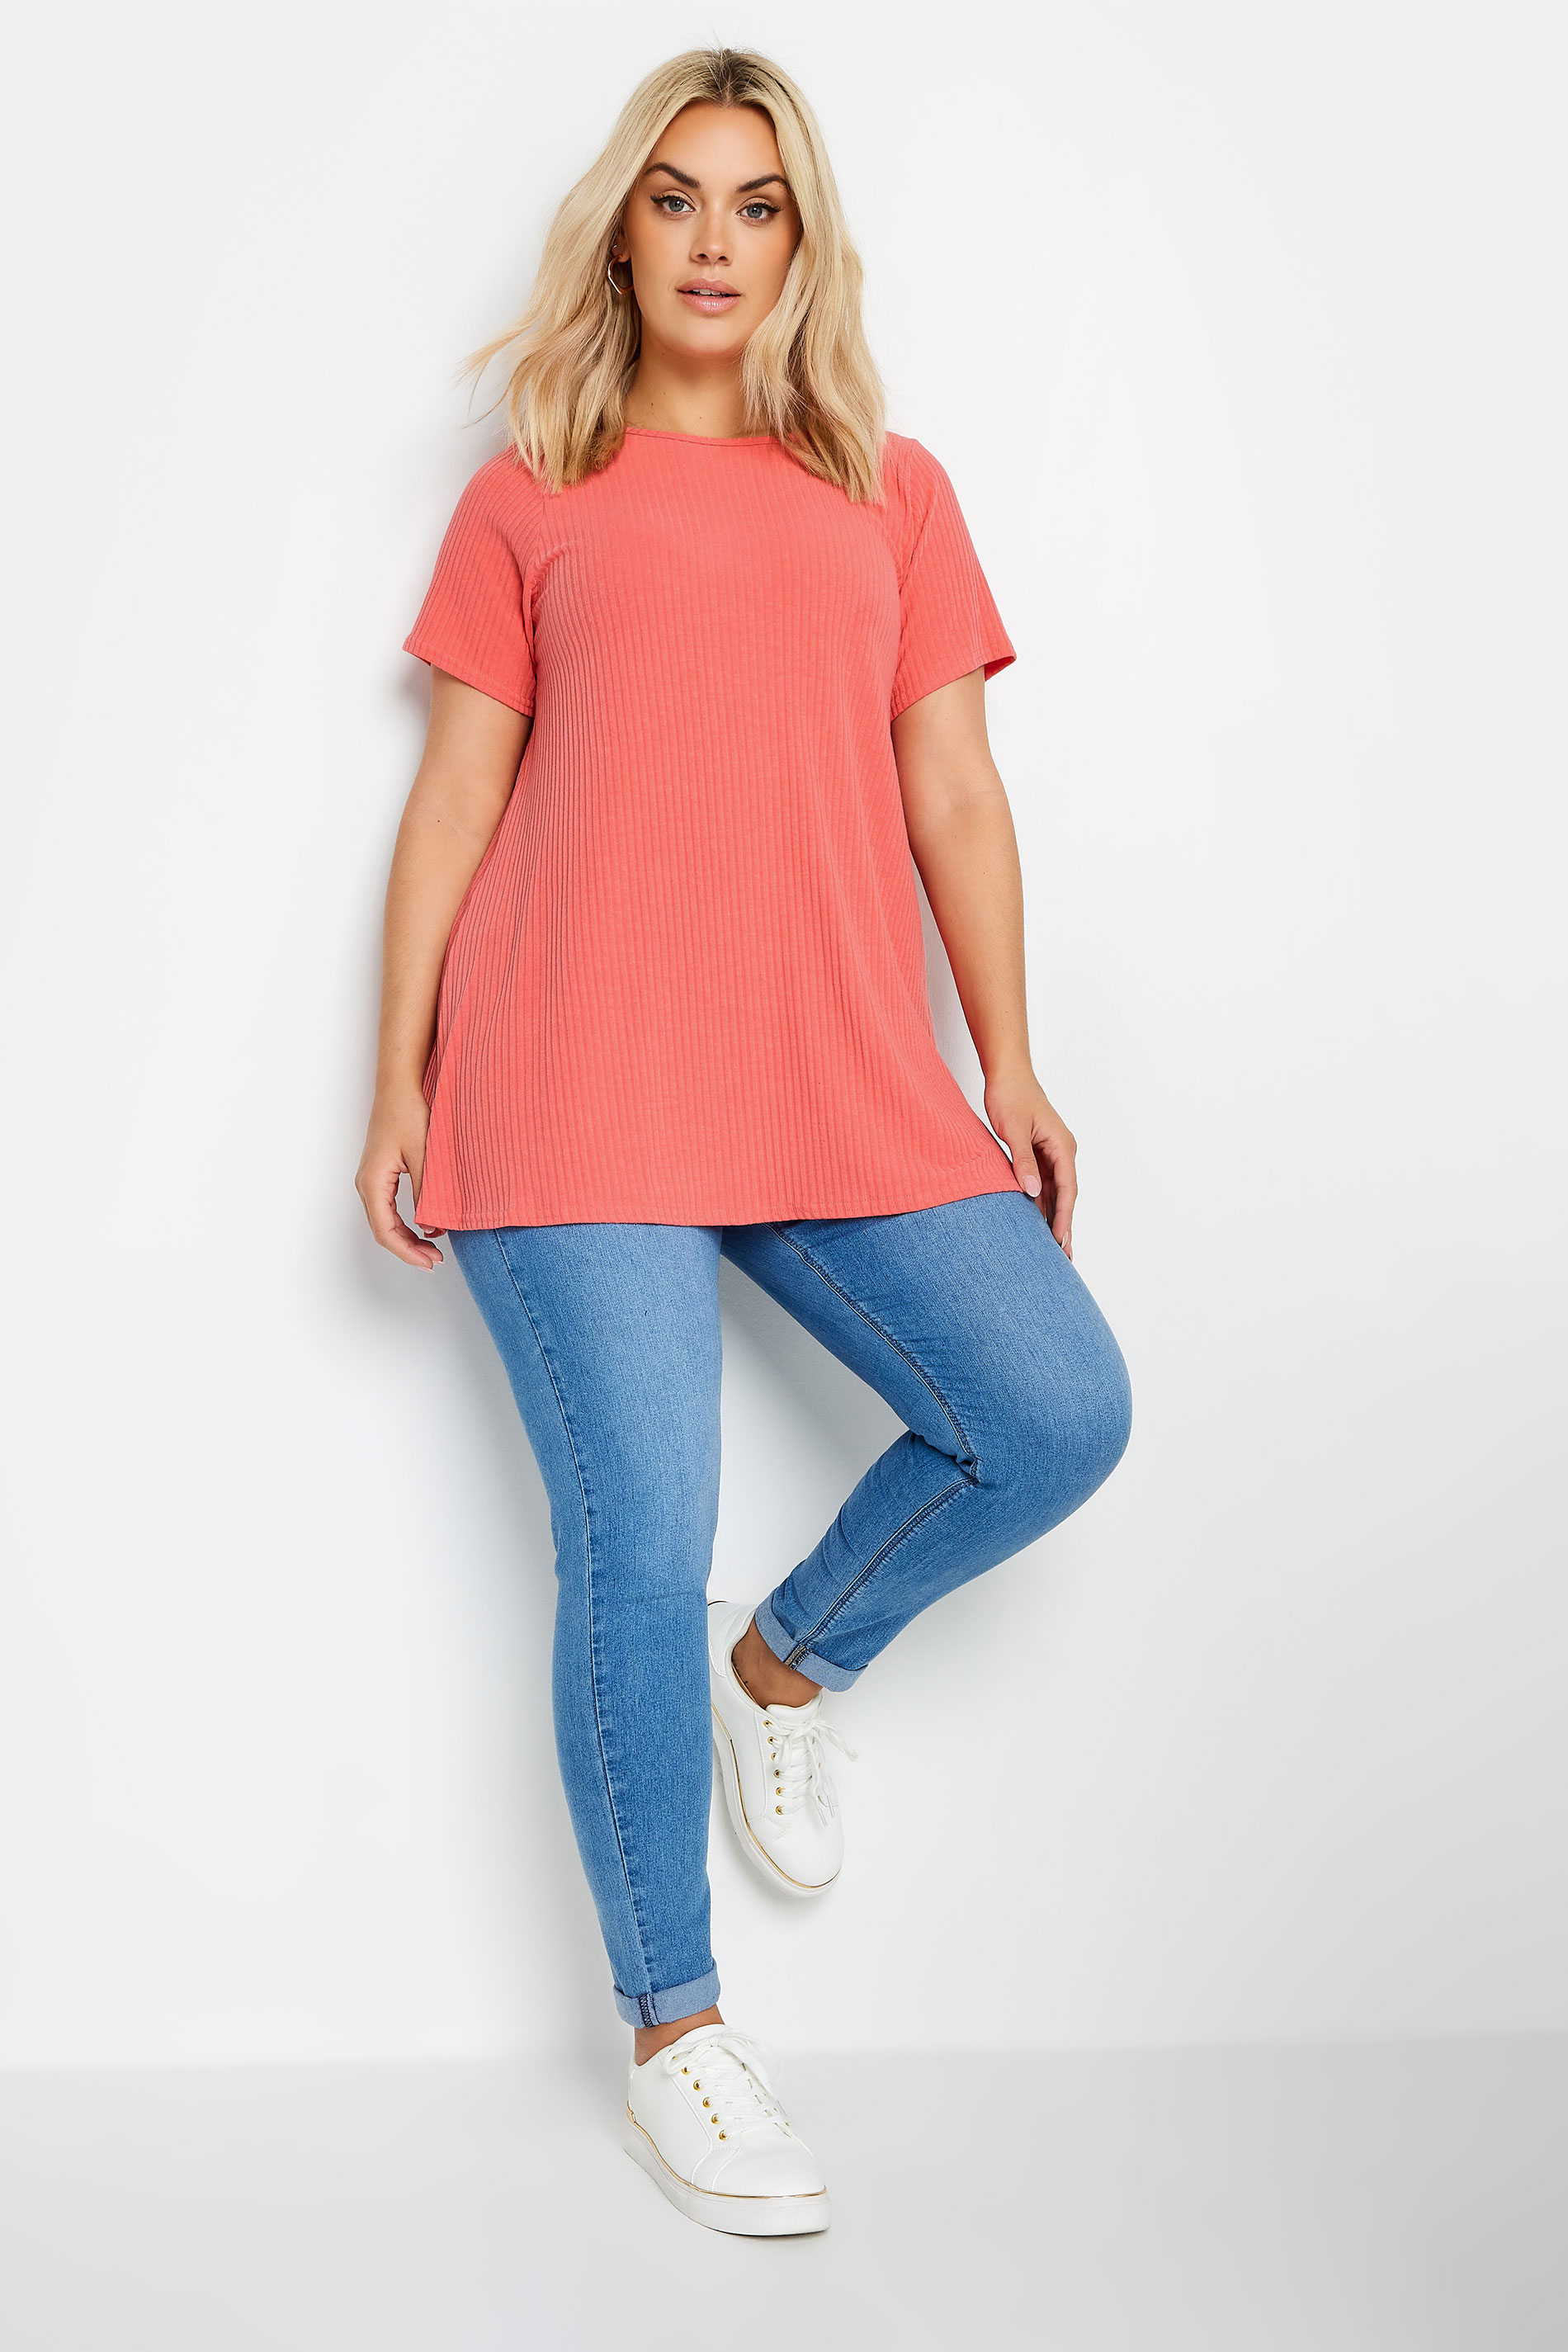 YOURS Plus Size Coral Orange Ribbed Swing Top | Yours Clothing 2